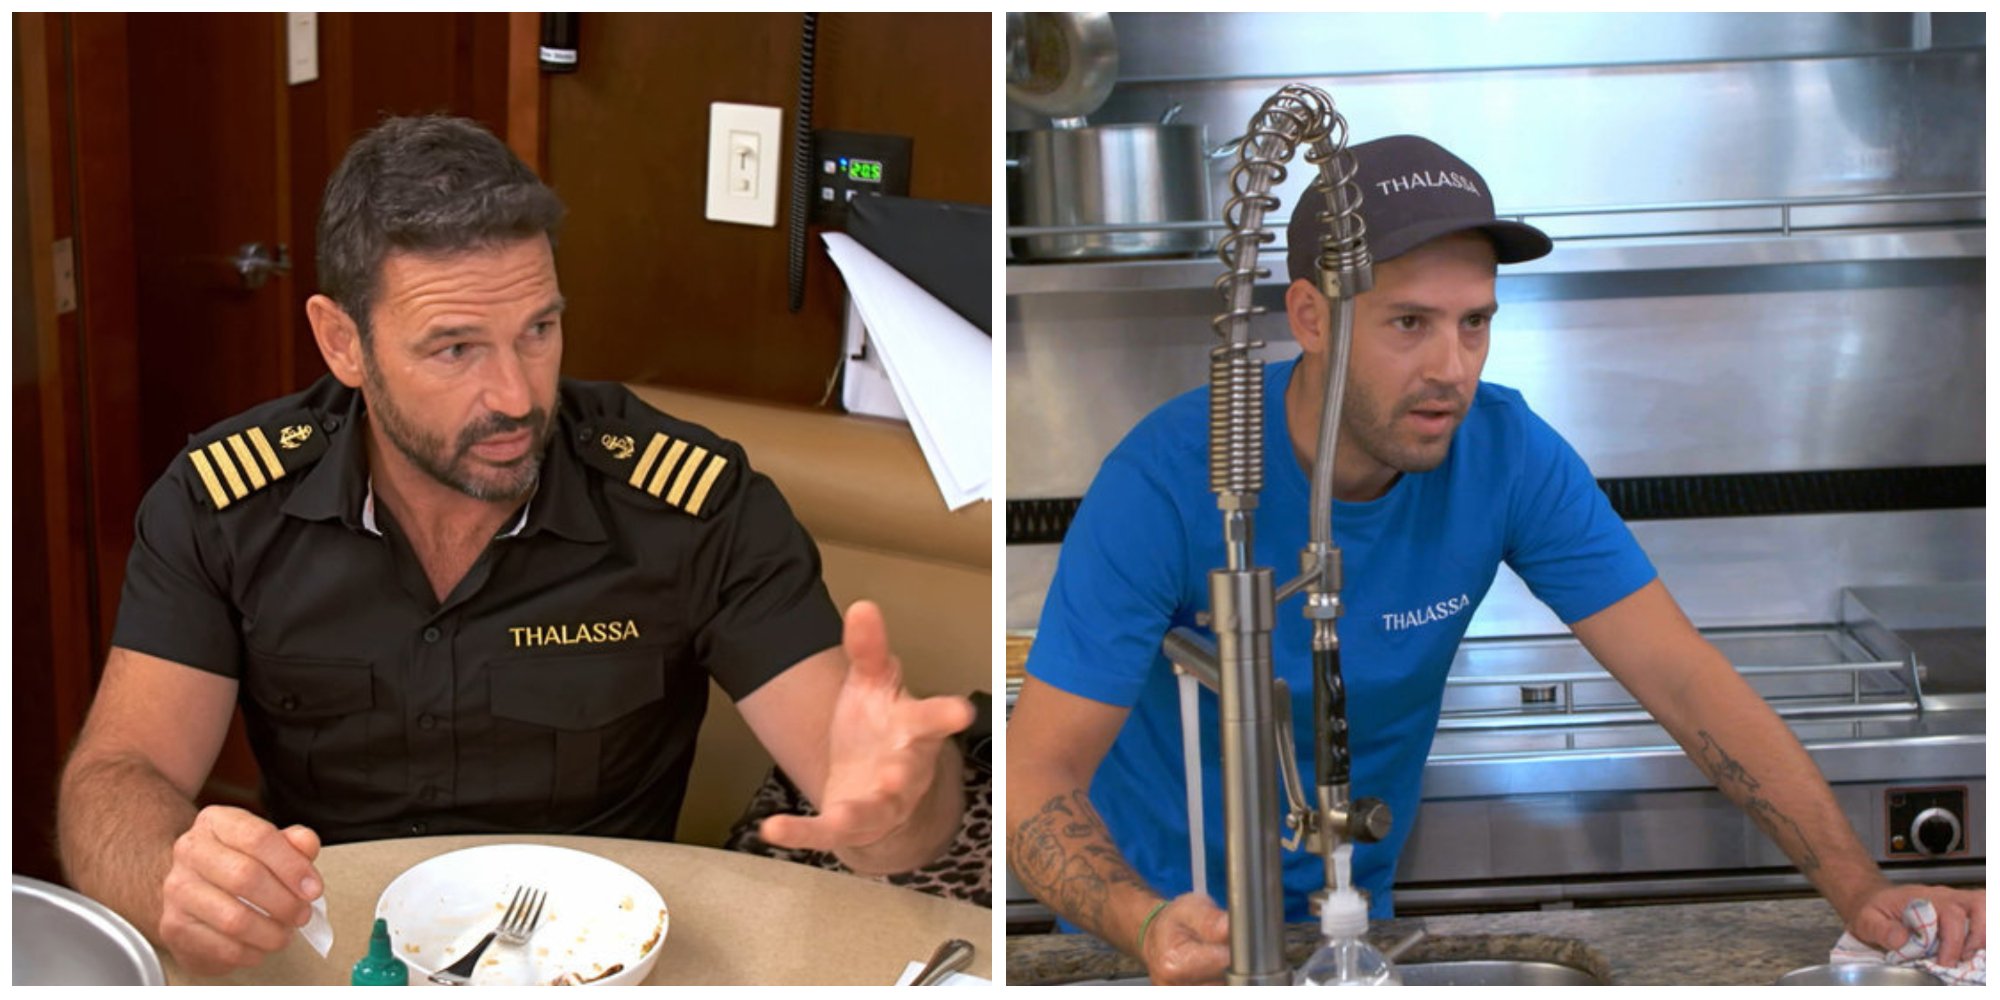 Captain Jason Chambers gestures at a crew member, meanwhile chef Ryan McKeown wipes down counters